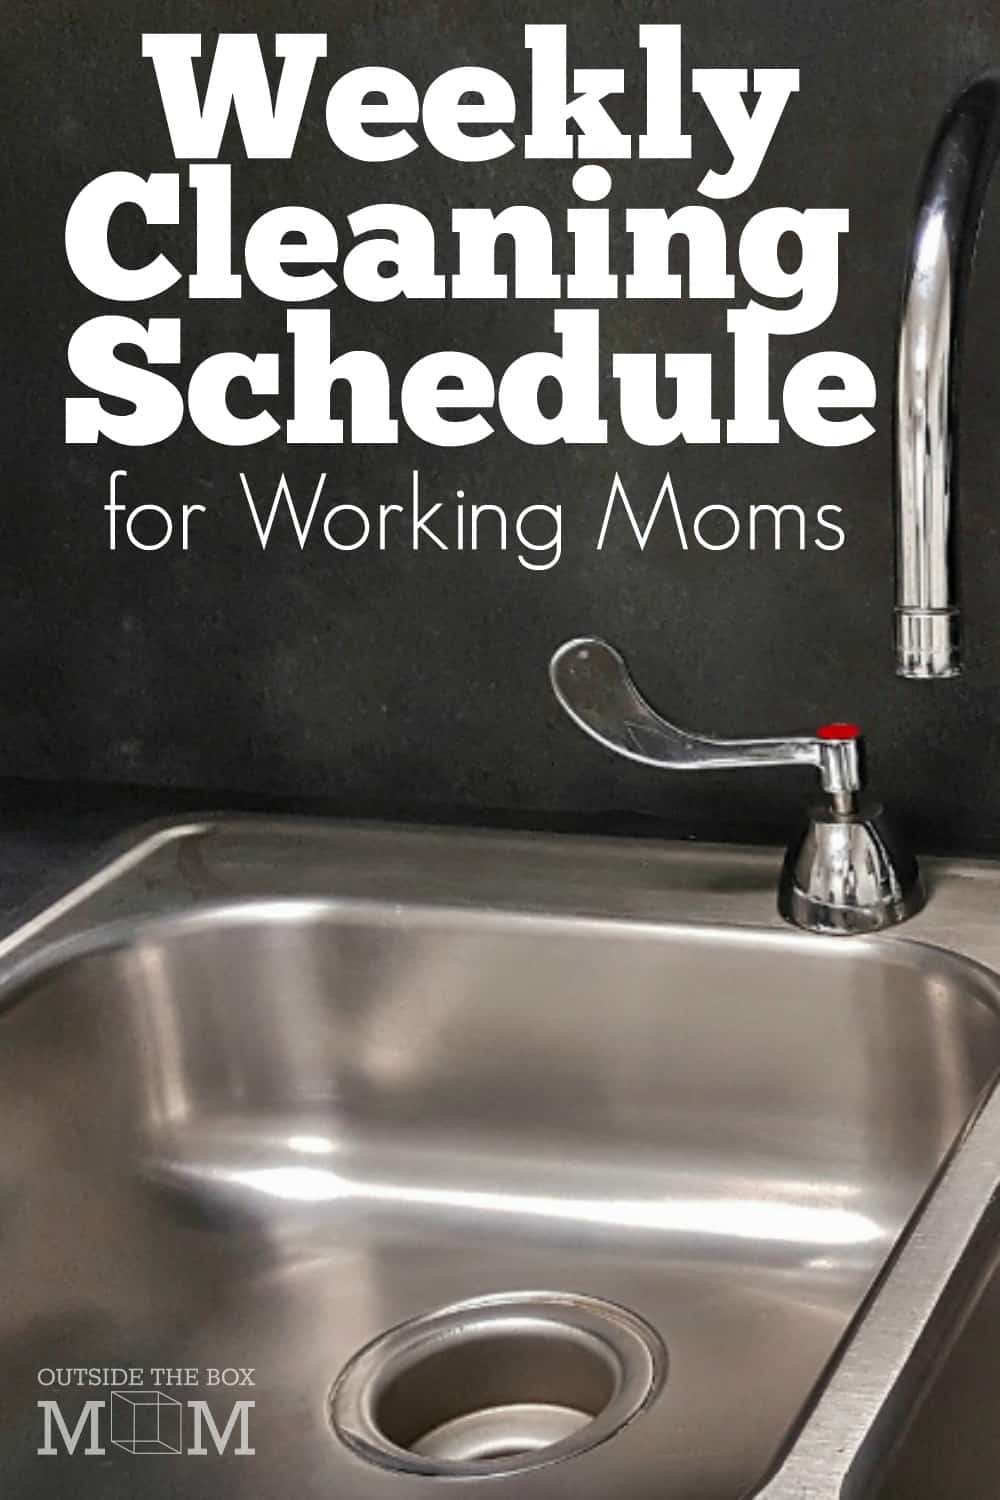 I struggle with creating and following a weekly cleaning schedule and being a working mom. This list is going to save me so much time and ensure my house is in presentable condition.